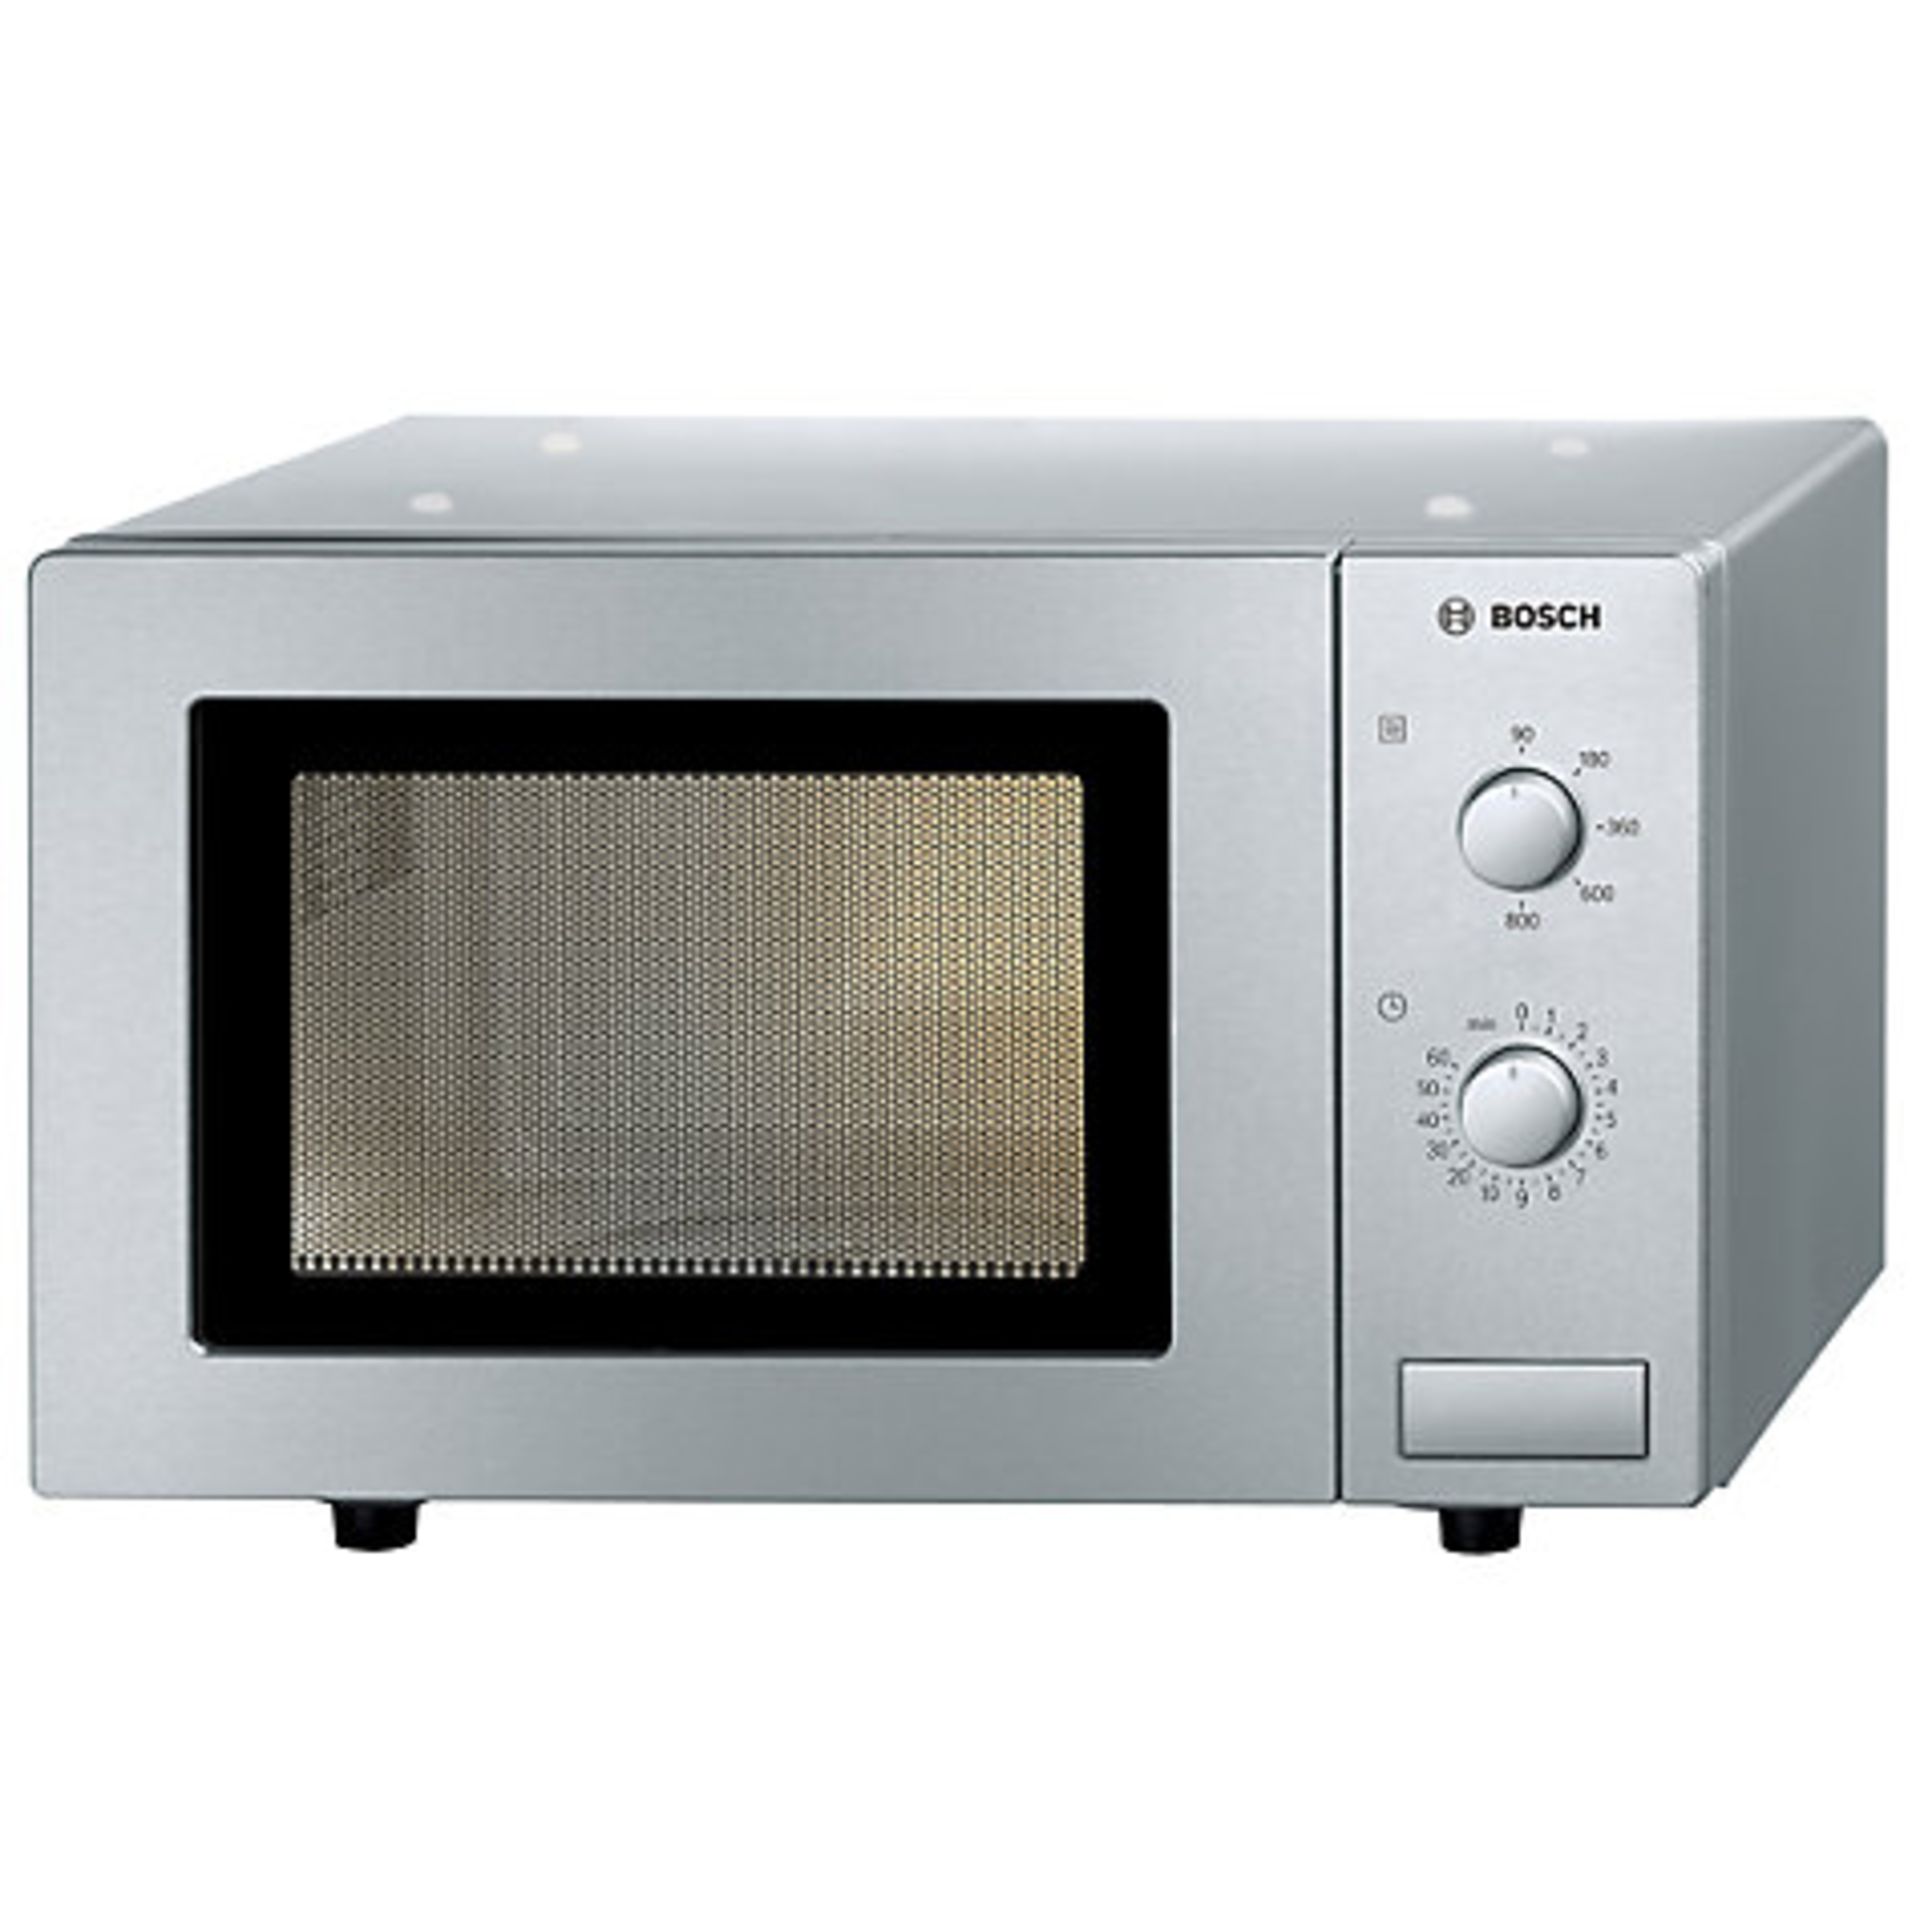 1 x BOXED BOSCH HMT72M450B BUILT IN MICROWAVE OVEN RRP £100 09.08.17 (86691201) *PLEASE NOTE THAT